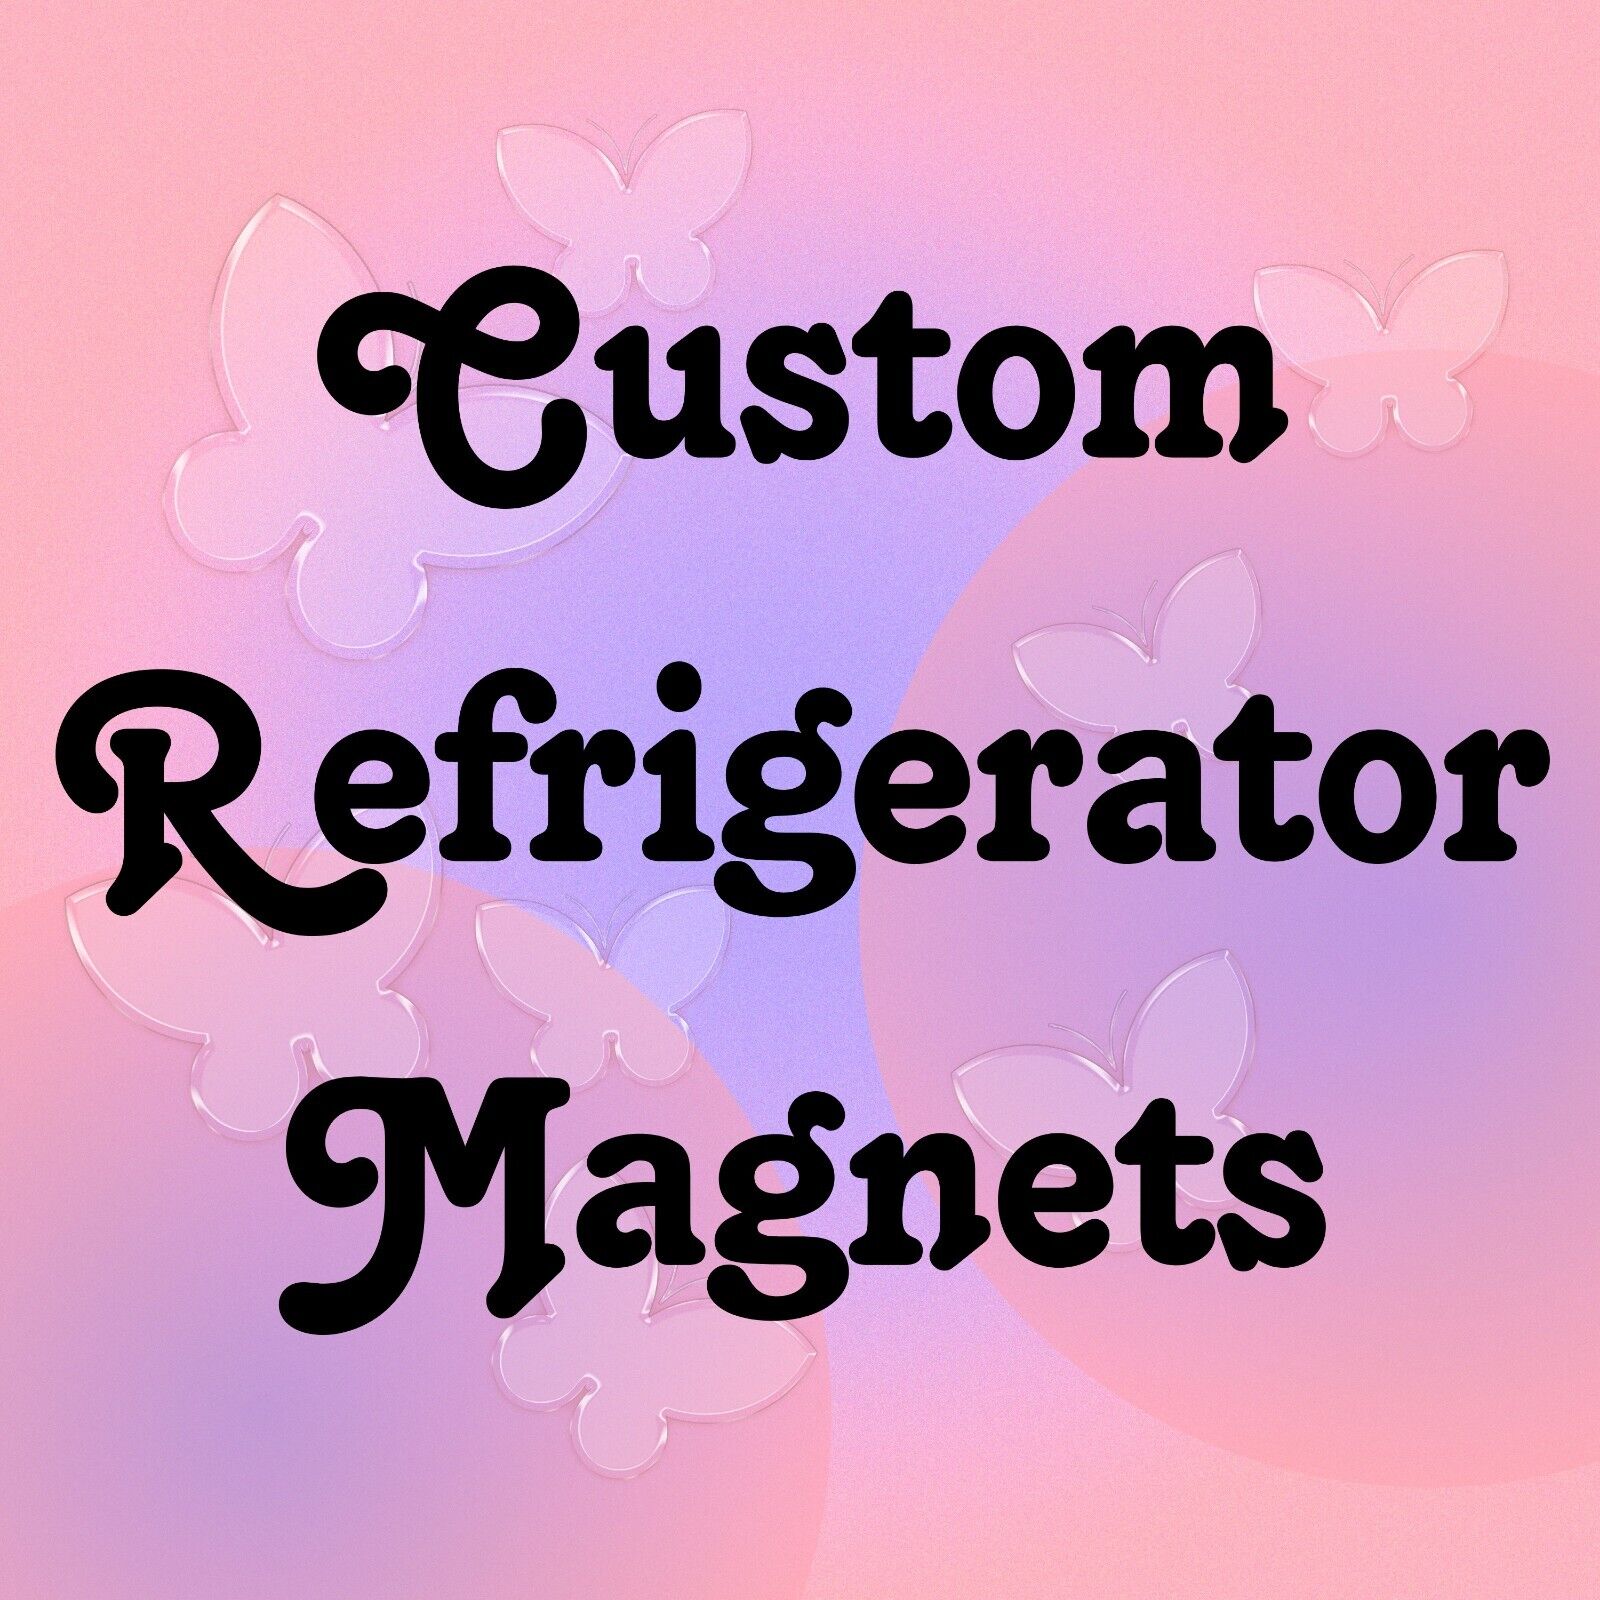 Custom 4x6 Refrigerator Magnet any image you want